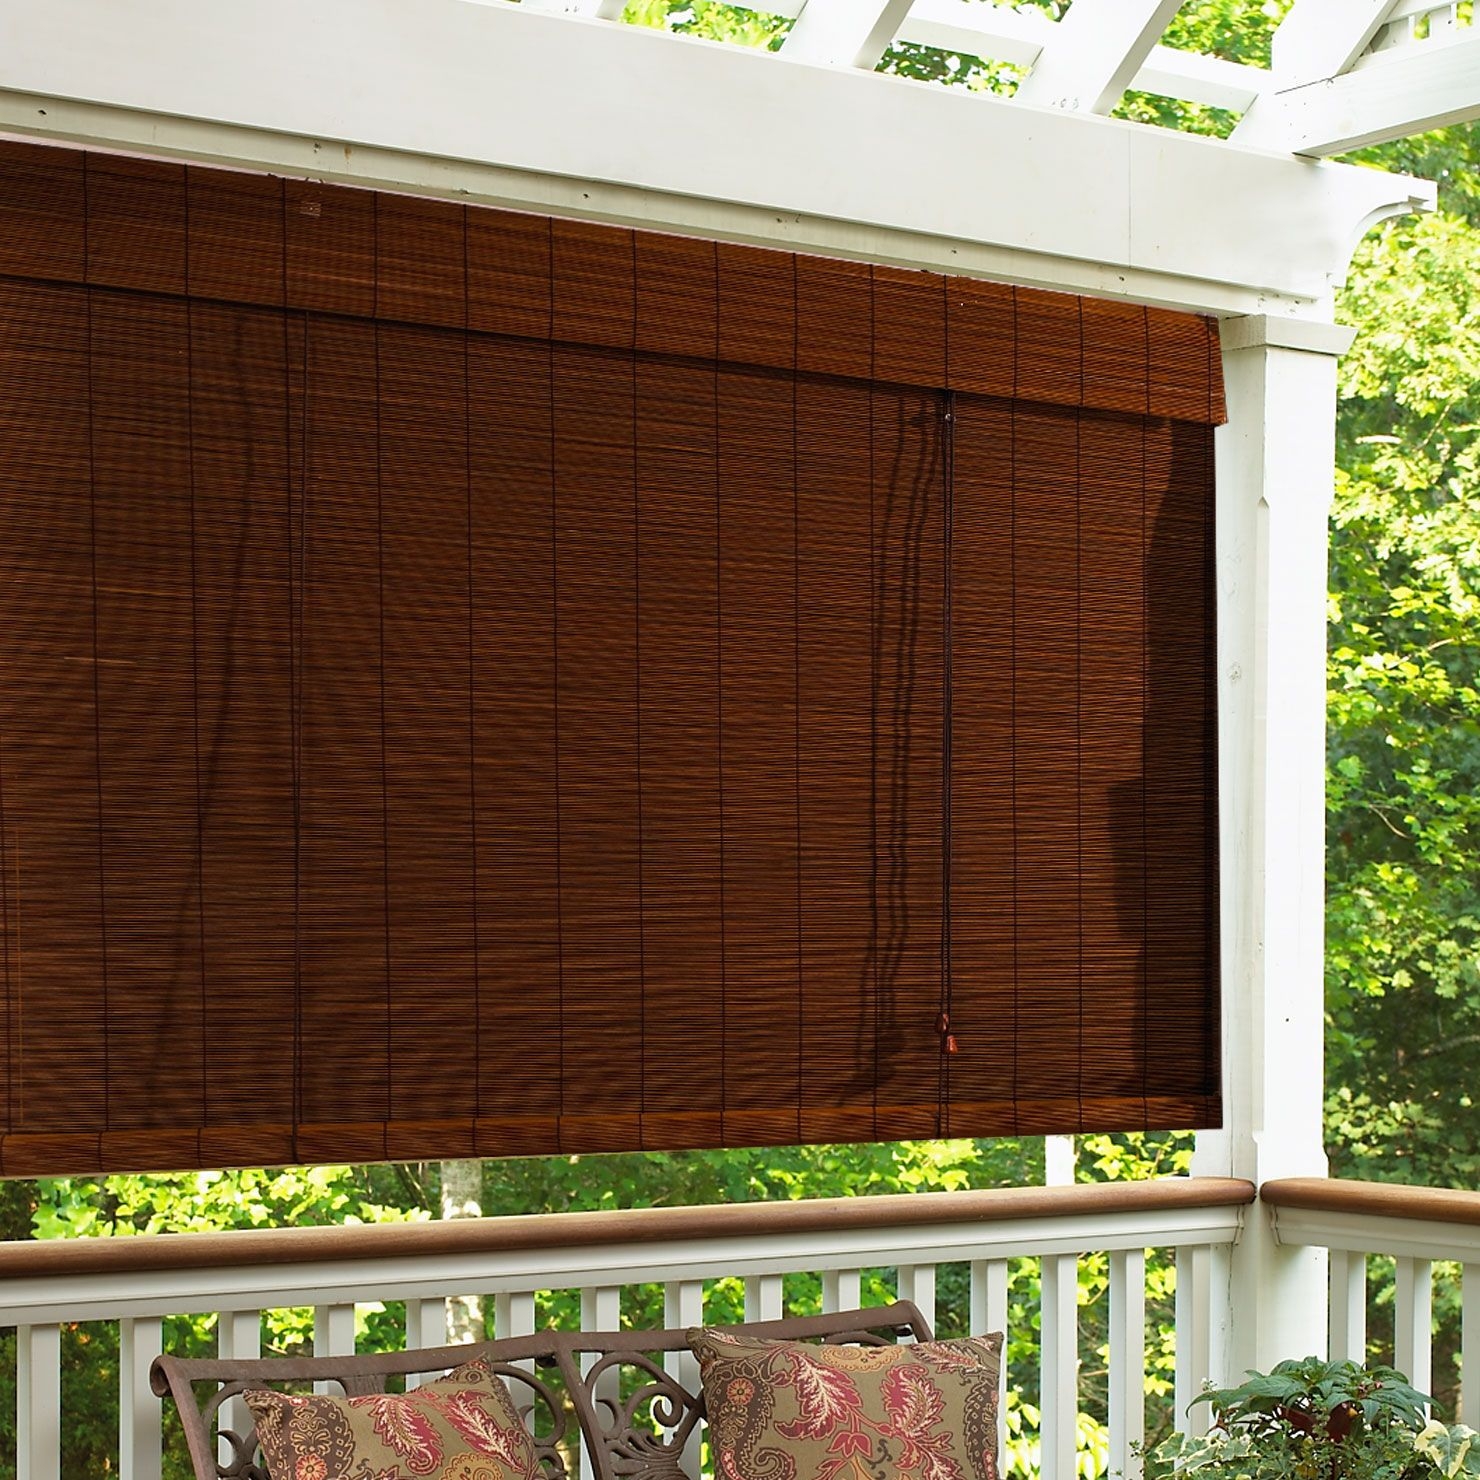 Details about   Outdoor Sun Shade Cordless Roll-Up Exterior Natural Bamboo Tropical Patio Porch 